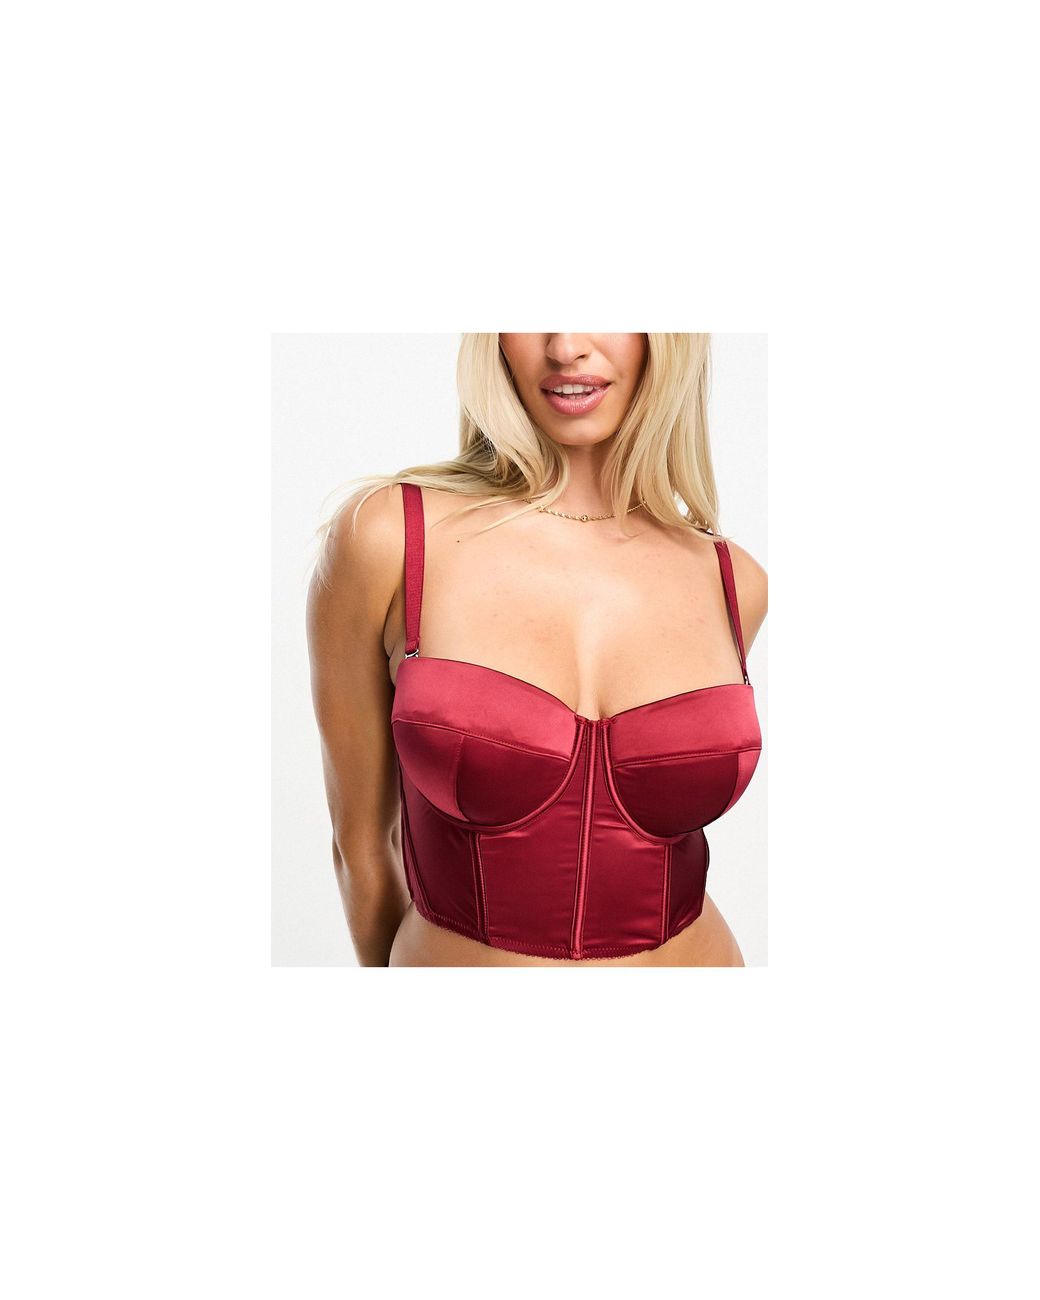 https://cdna.lystit.com/1040/1300/n/photos/asos/95733aea/asos-Red-Fuller-Bust-Satin-Padded-Underwire-Corset-With-Detachable-Straps.jpeg